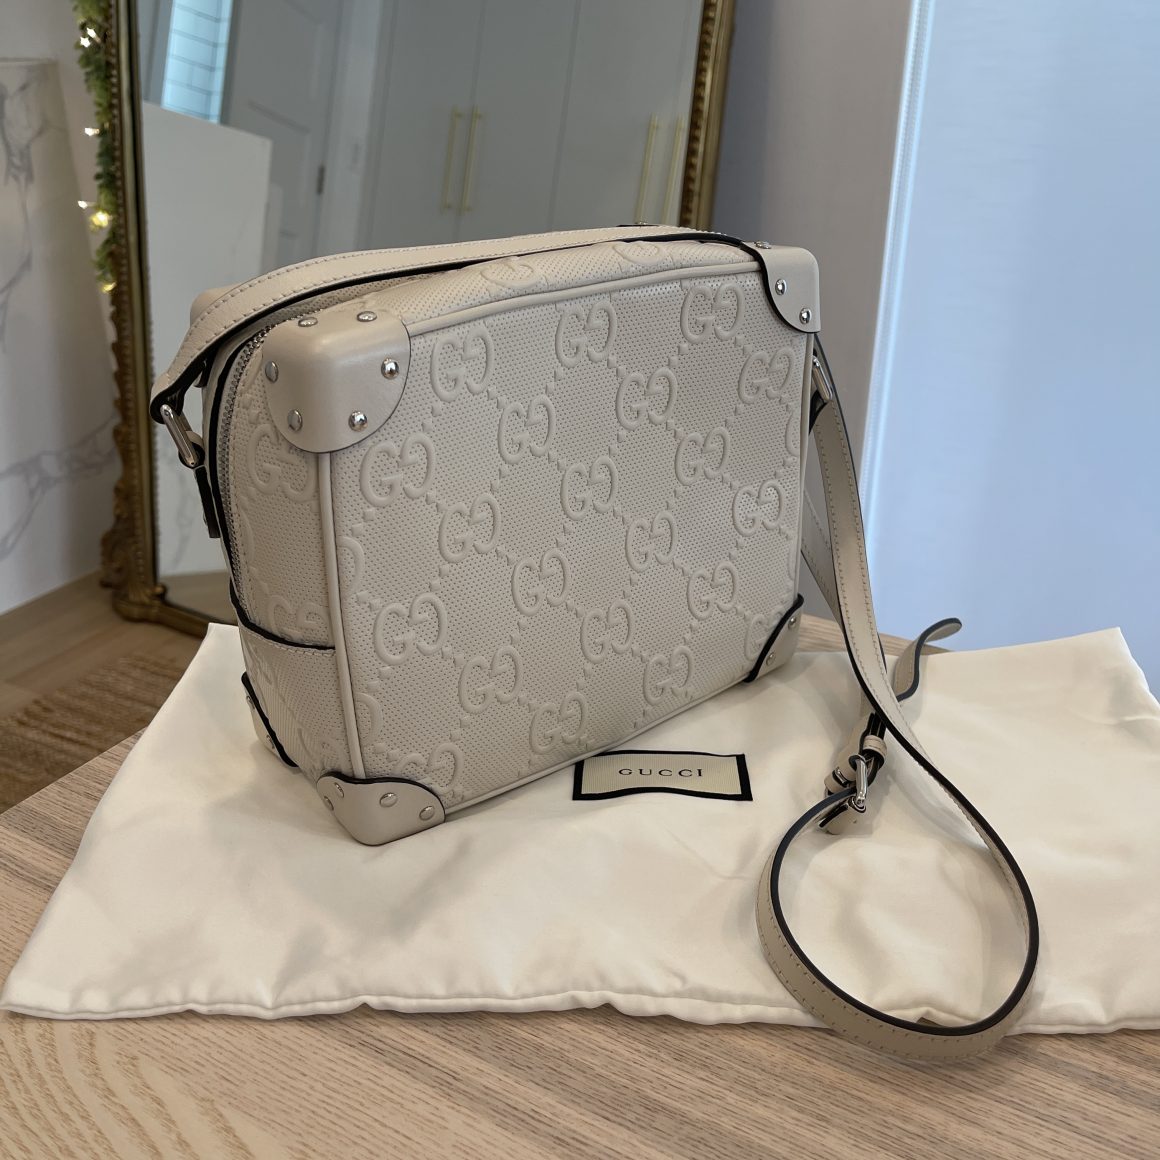 Gucci Leather Embossed GG Messenger Bag